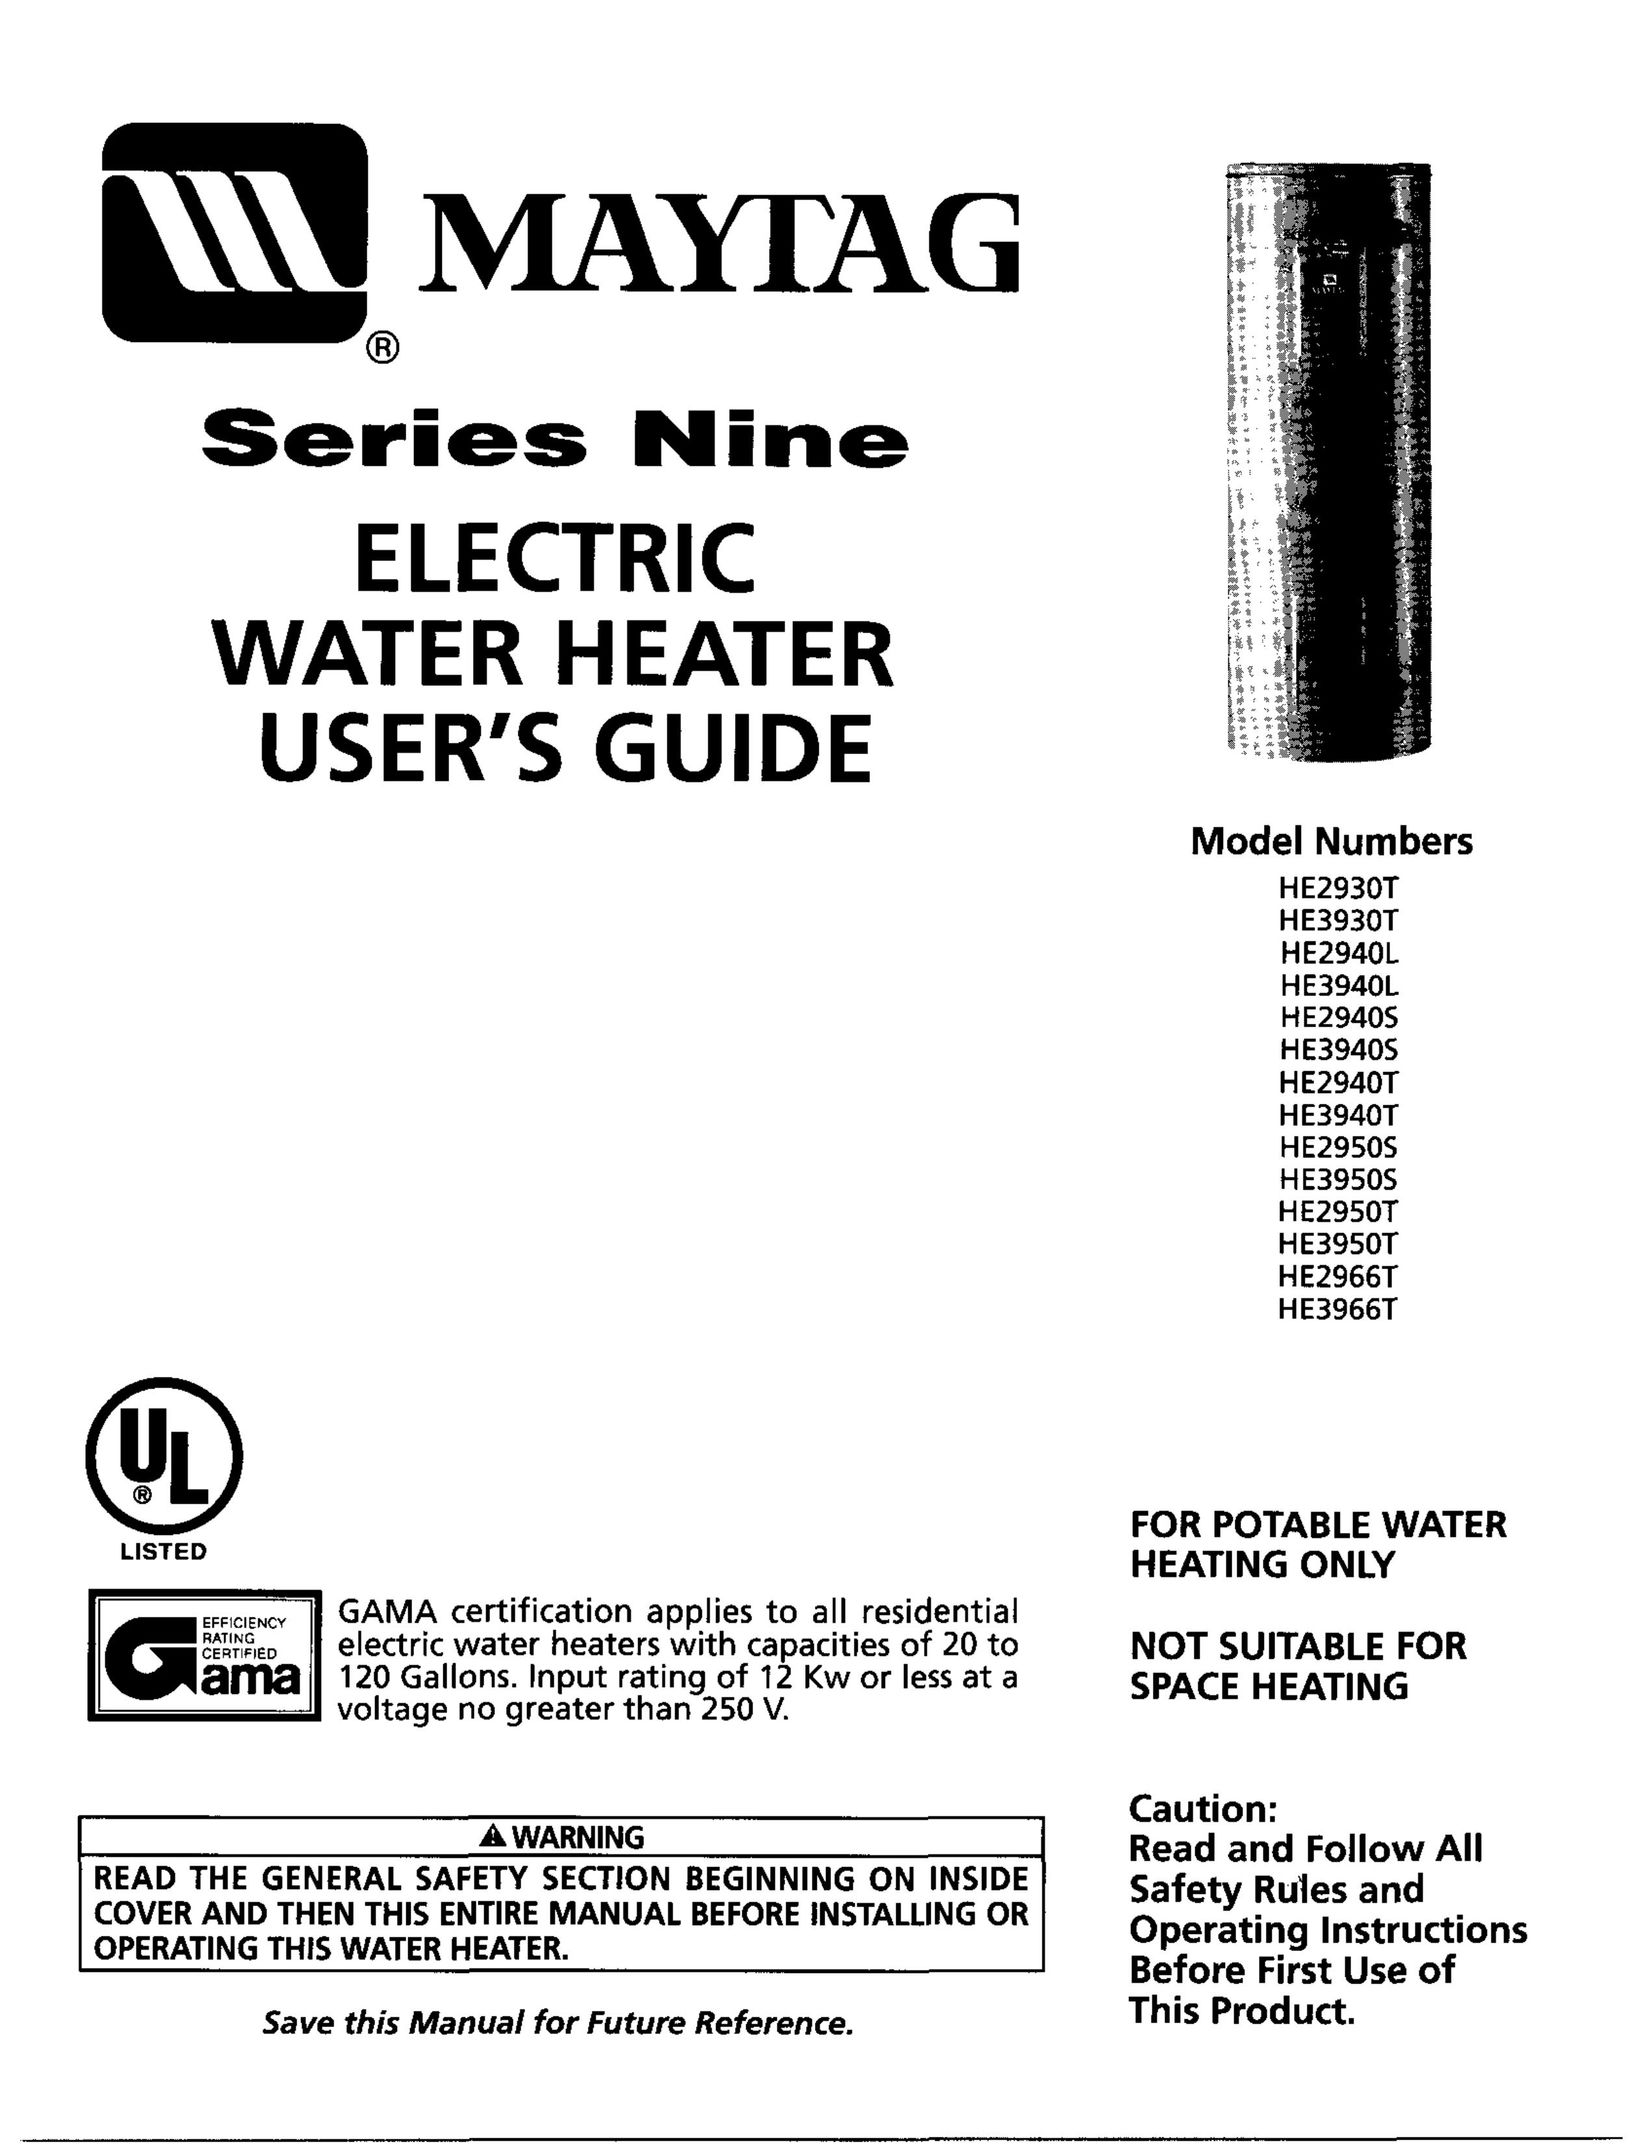 Maytag HE3940L Water Heater User Manual